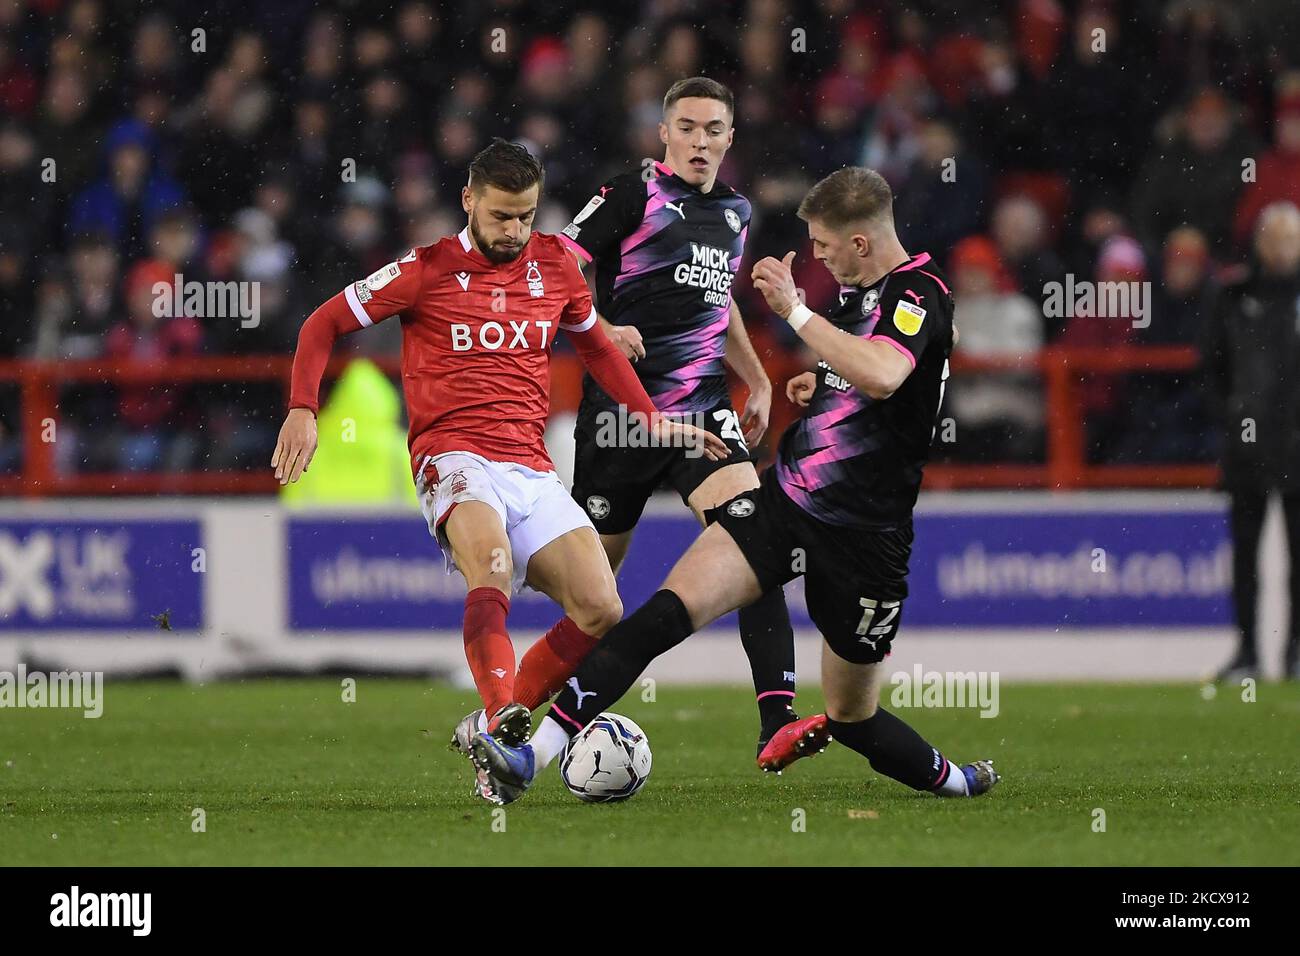 Josh Knight of Peterborough United tackles Philip Zinkernagel of Nottingham Forest during the Sky Bet Championship match between Nottingham Forest and Peterborough at the City Ground, Nottingham on Saturday 4th December 2021. (Photo by Jon Hobley/MI News/NurPhoto) Stock Photo